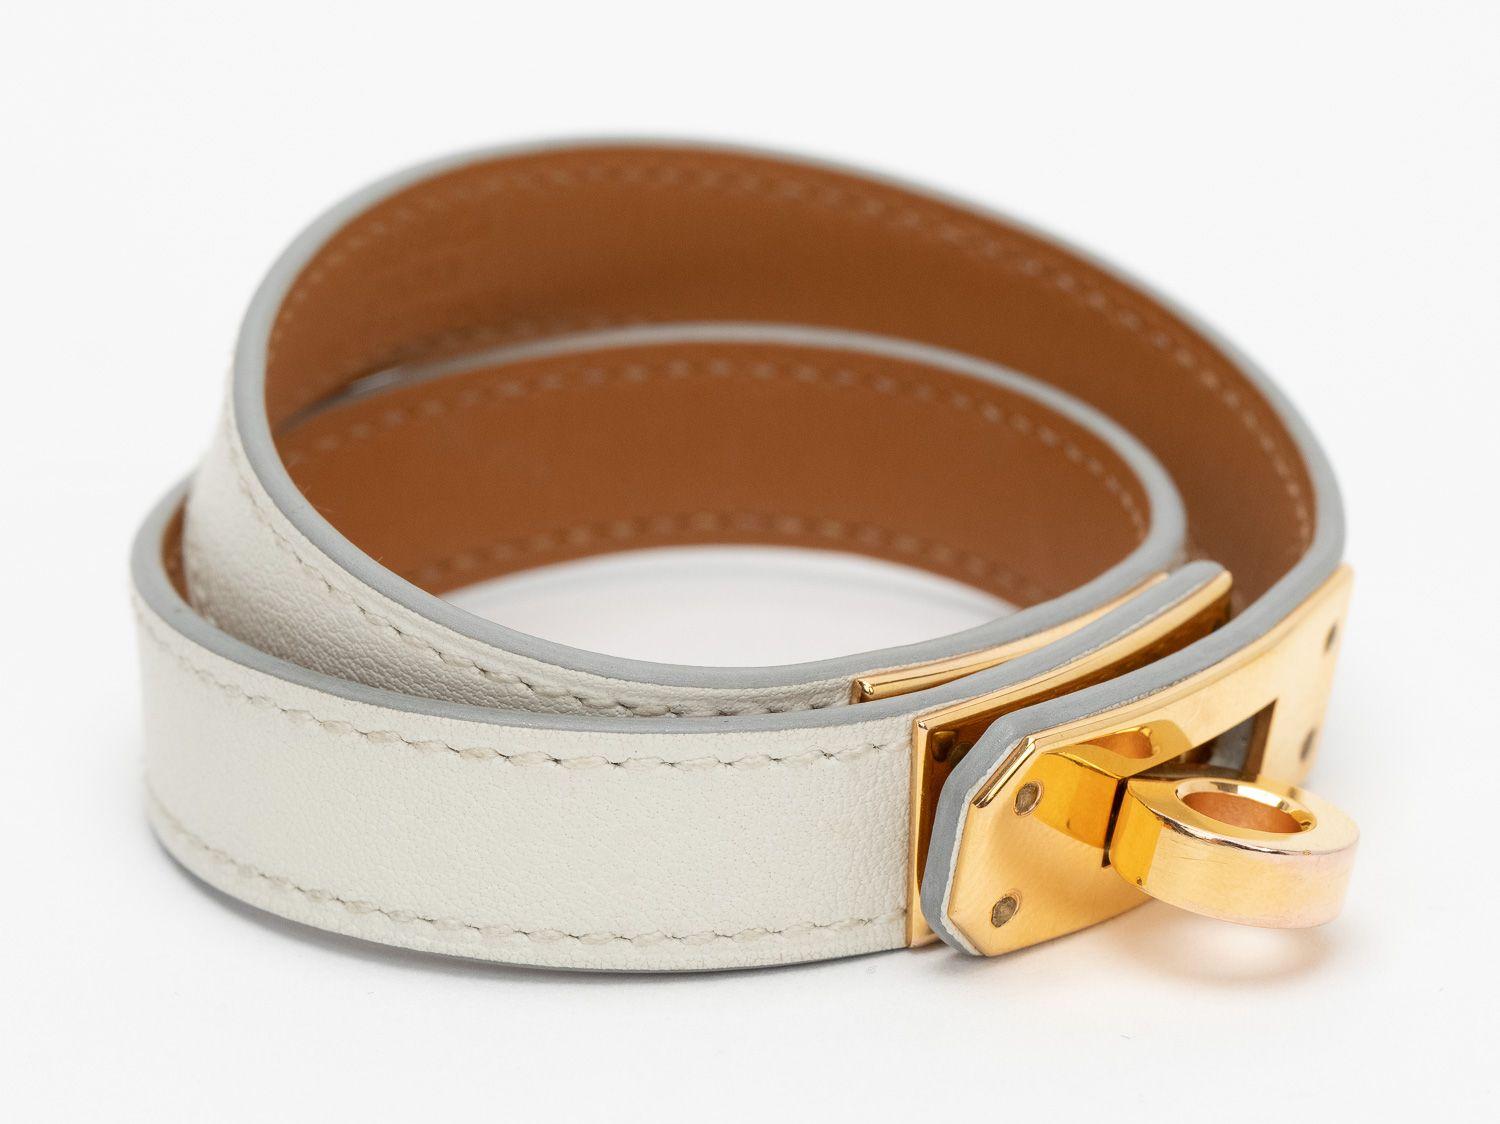 Hermès Kelly Double Tour bracelet in the color nata. Calfskin white leather and gold hardware. The date stamp shows a C, size small. Comes with a velvet pouch.